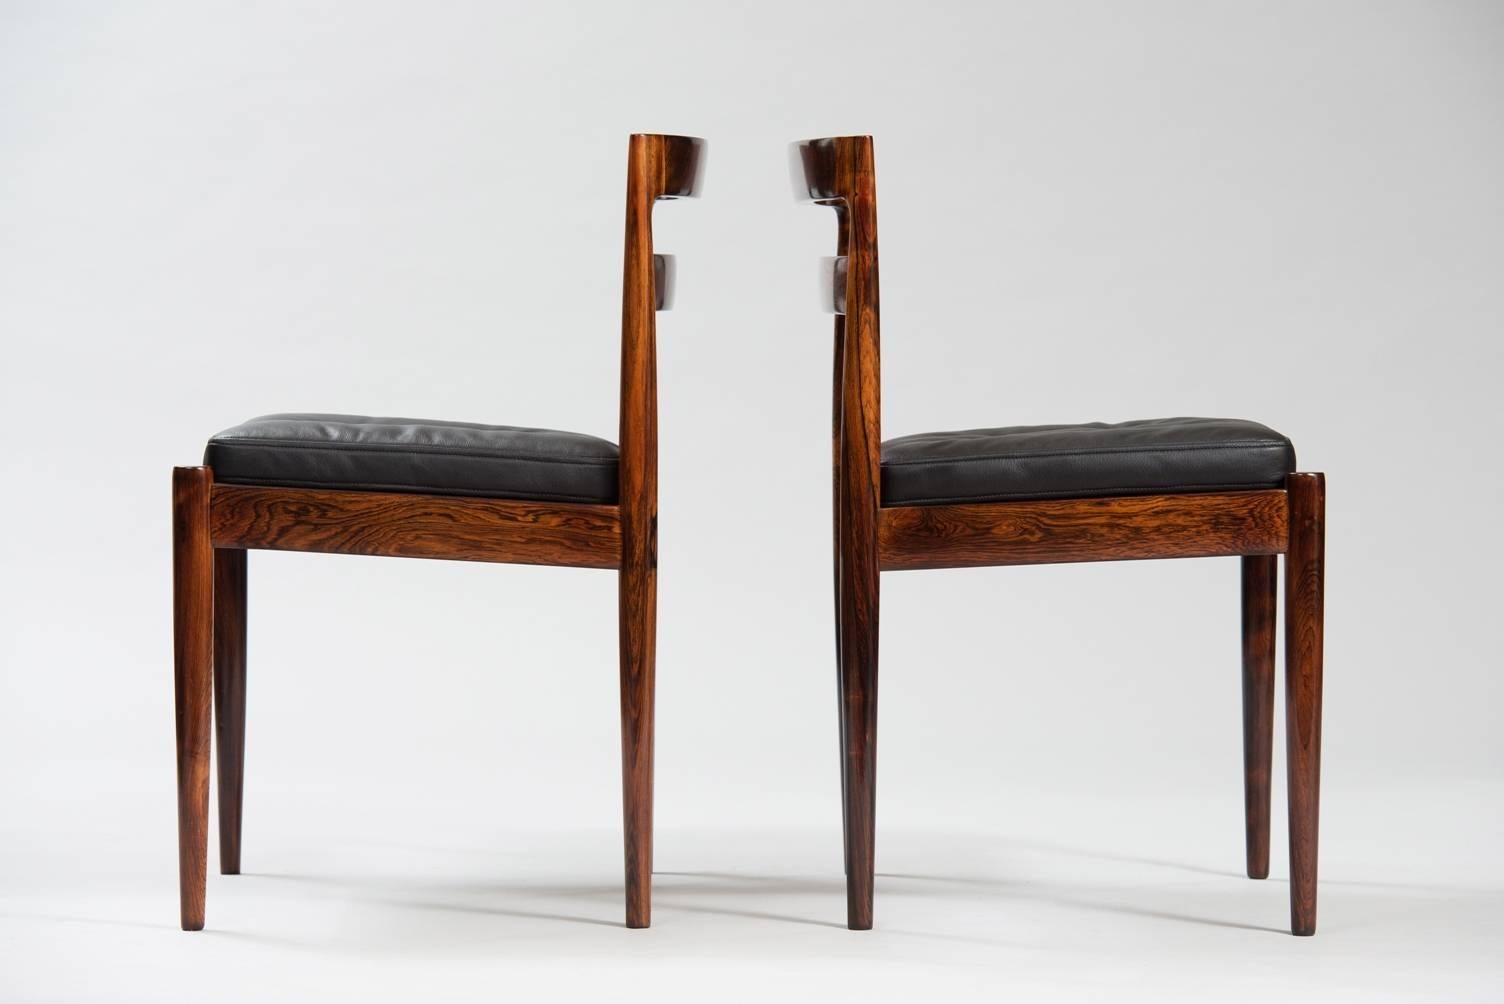 Set of eight massive rosewood dining chairs, model “301 Universe”, re-upholstered in black leather.
Producer: Magnus Olesen.